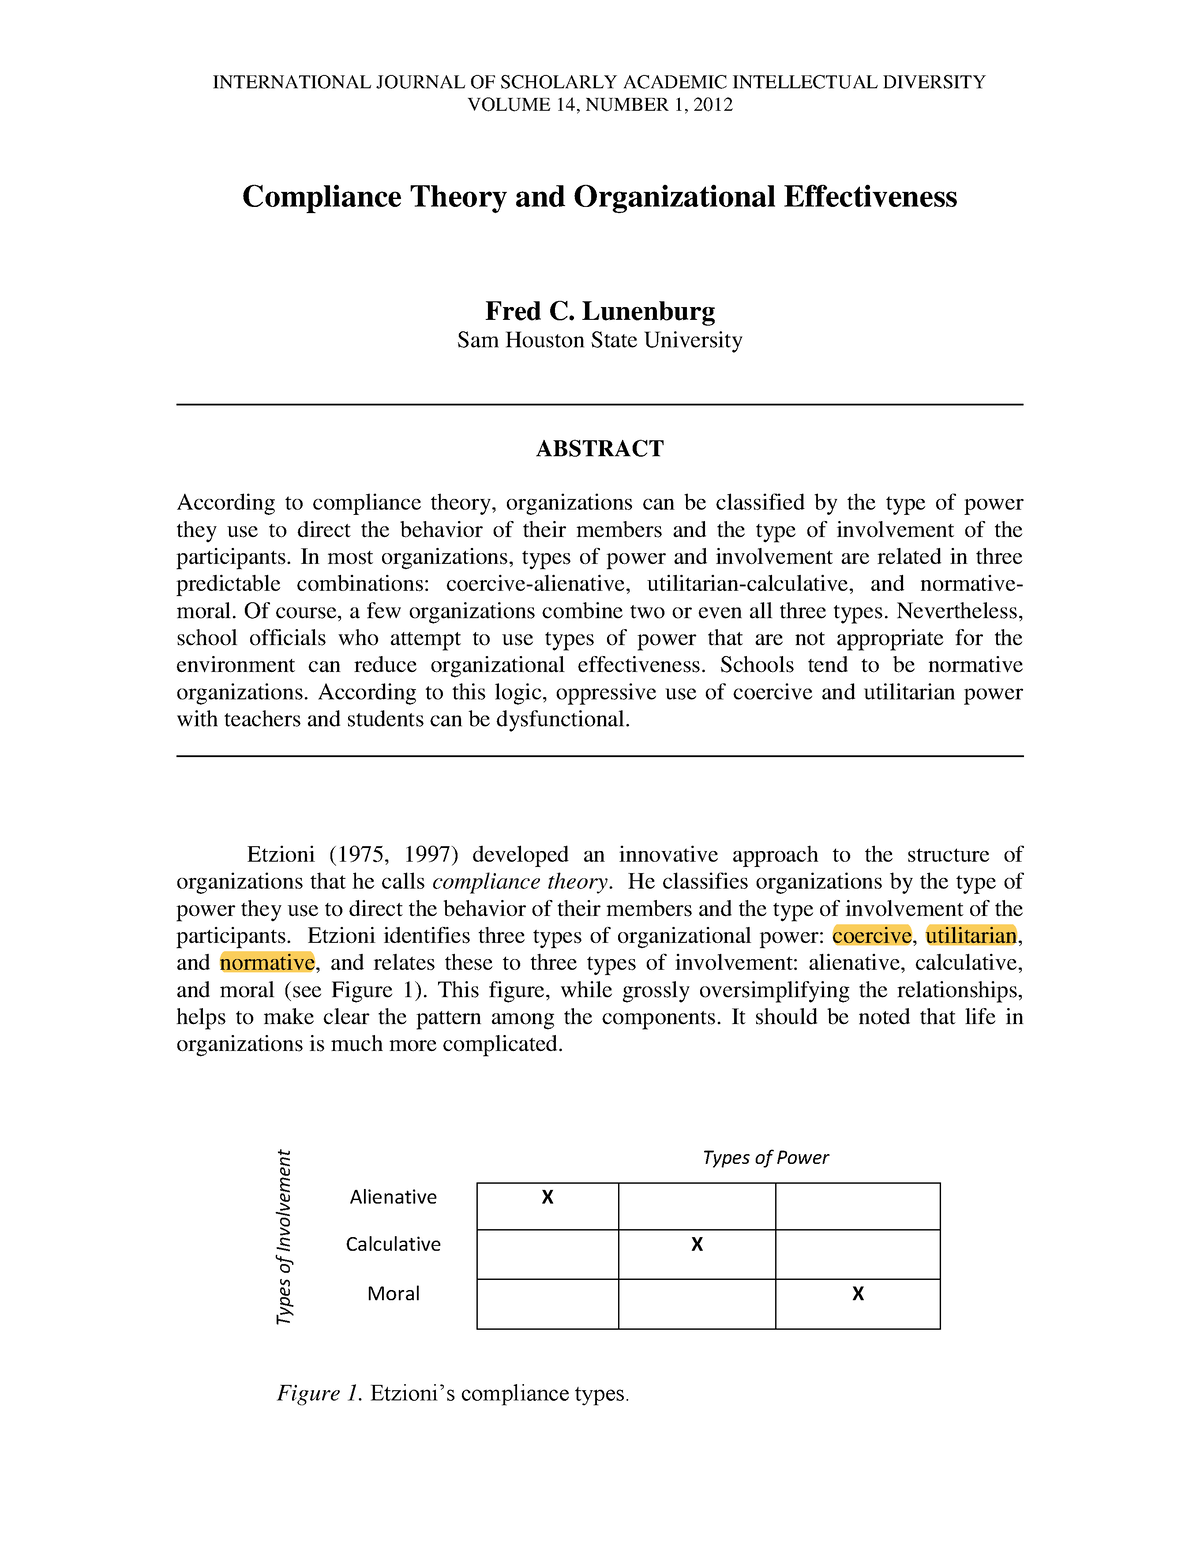 compliance theory a case study approach in understanding organizational commitment